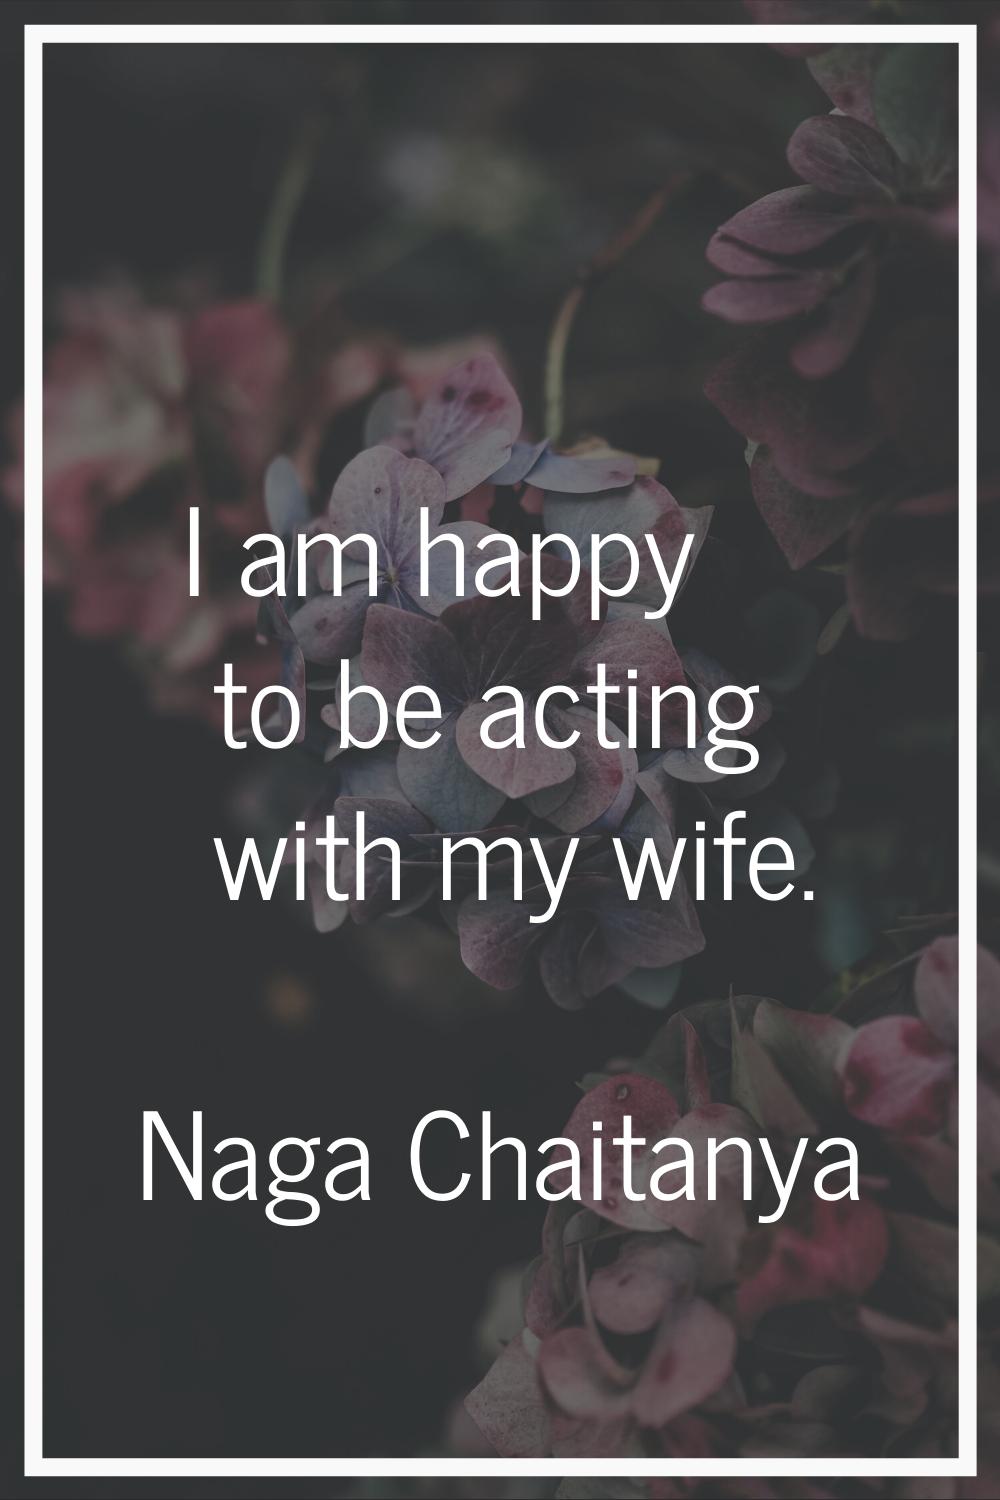 I am happy to be acting with my wife.